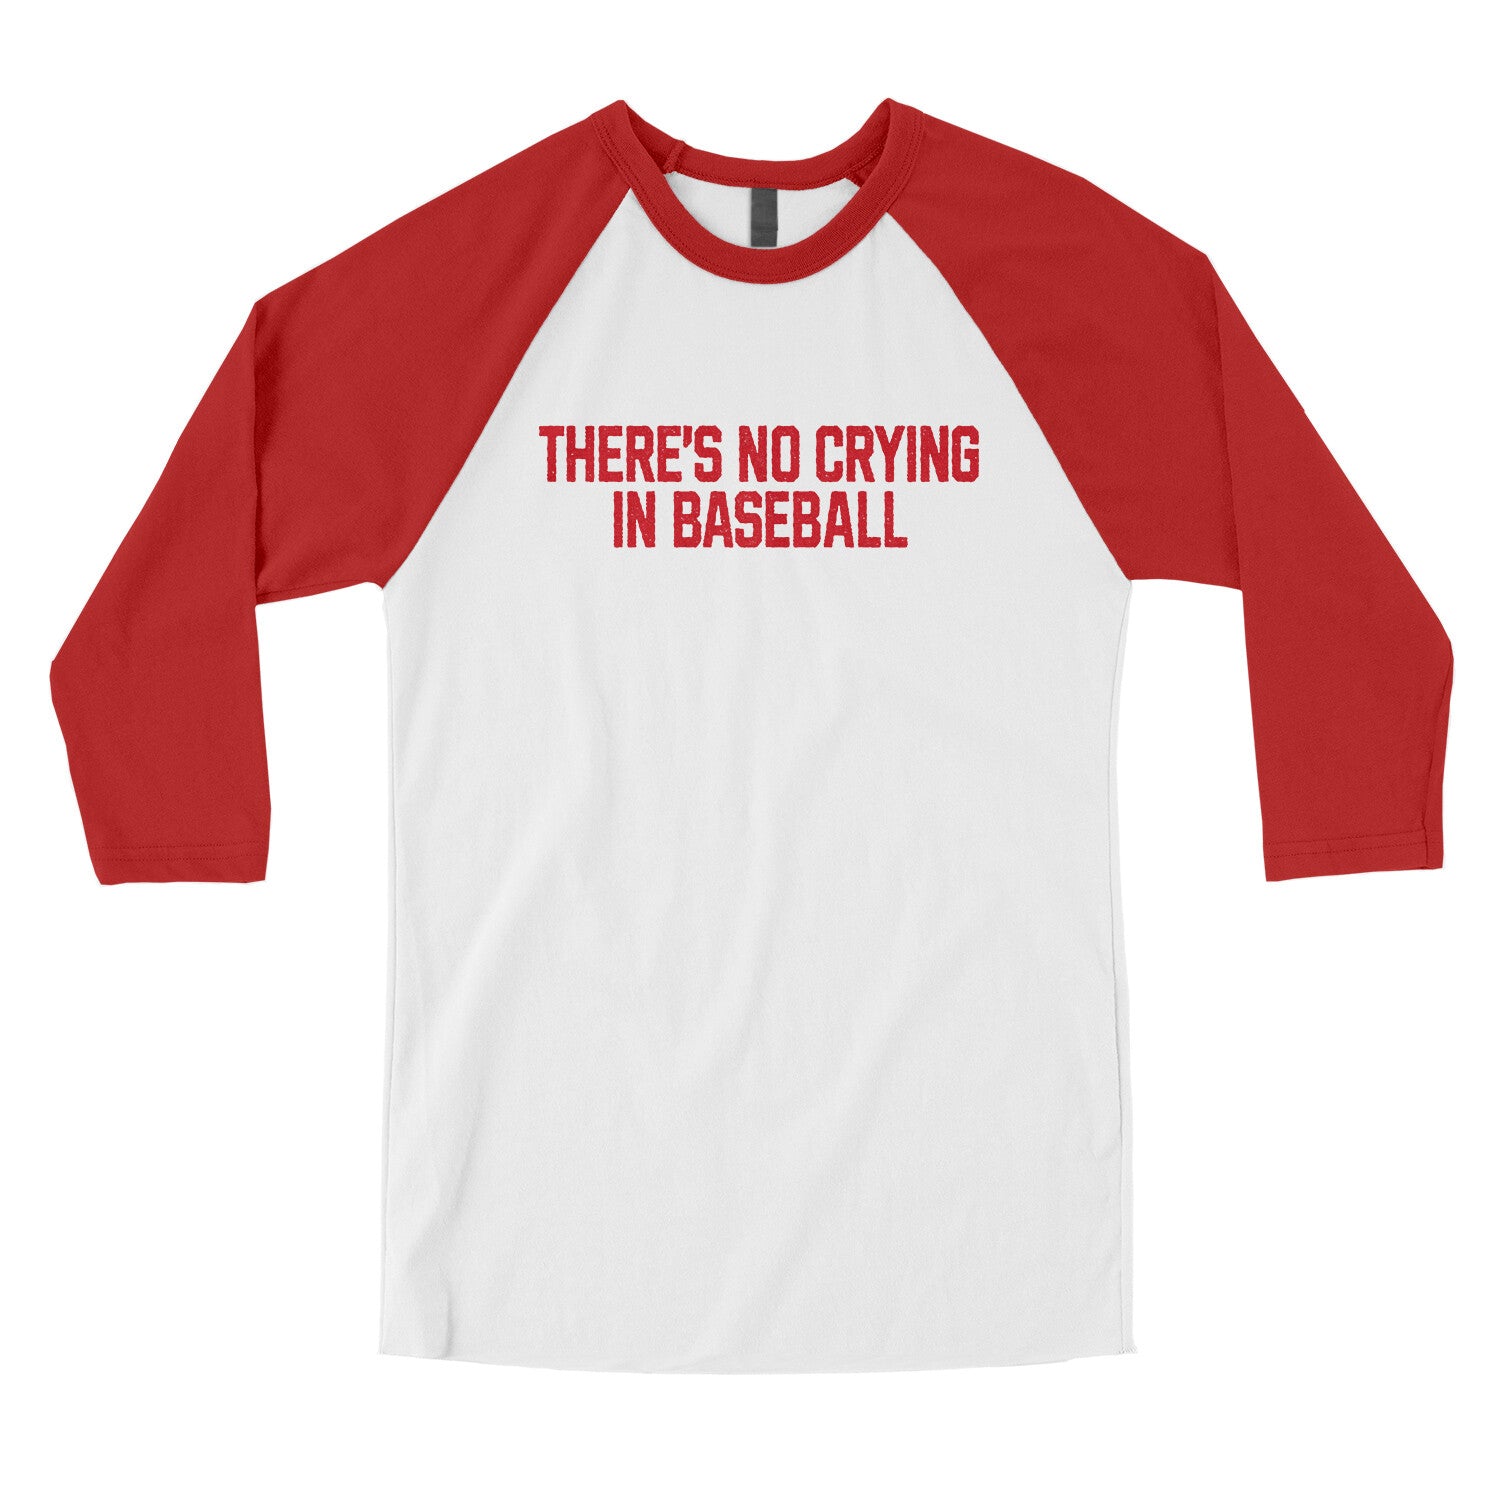 There's No Crying in Baseball in White with Red Color